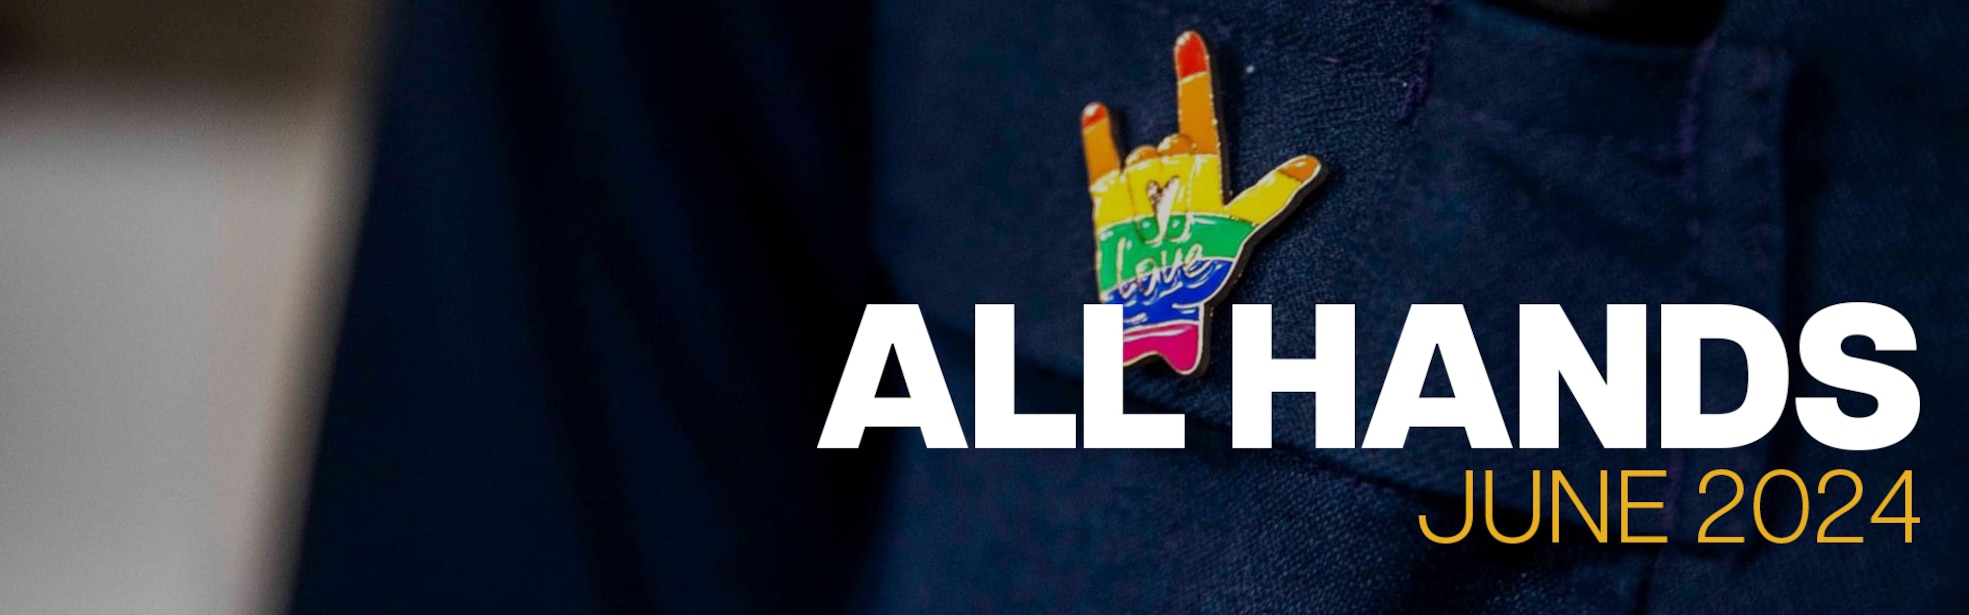 Dark hues of navy colors background with white font titled all hands with gold font reads june 2024. American Sign Language I love you is colored by stripes of rainbow in between all and hands.